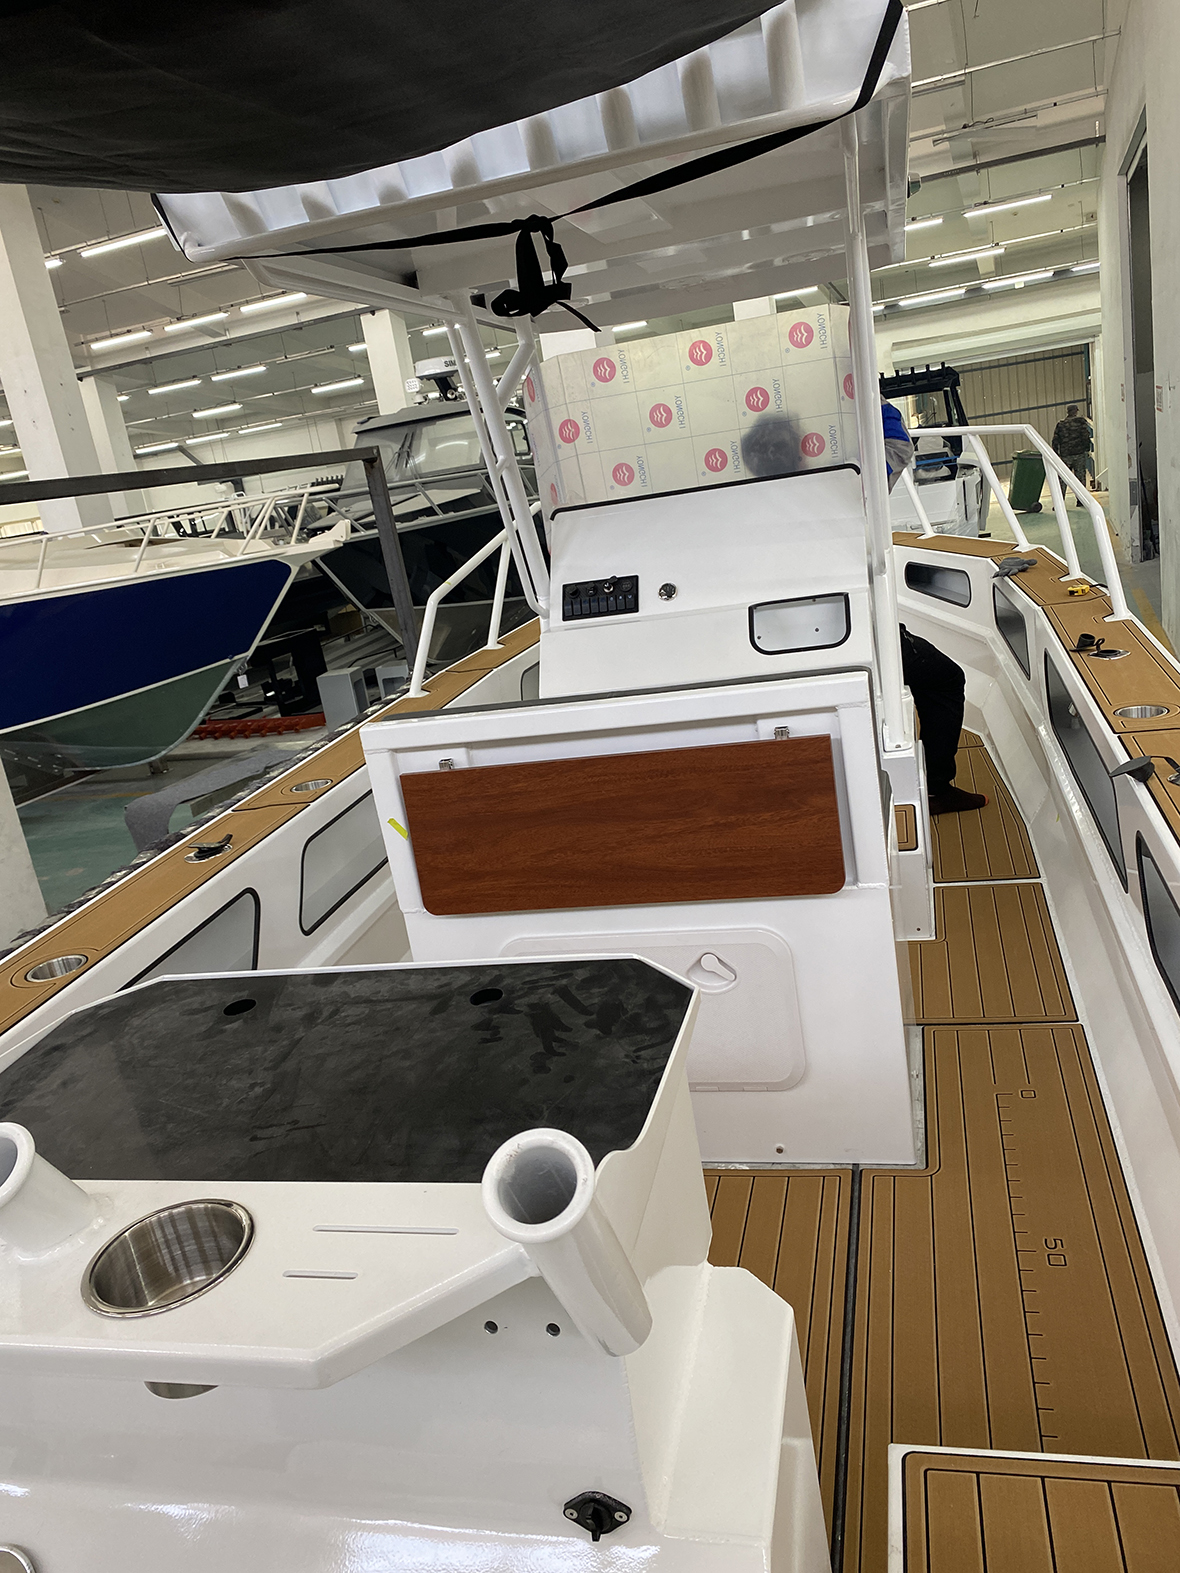 Easycraft 7.5m Center Console Boat from China manufacturer - Allsea Boats